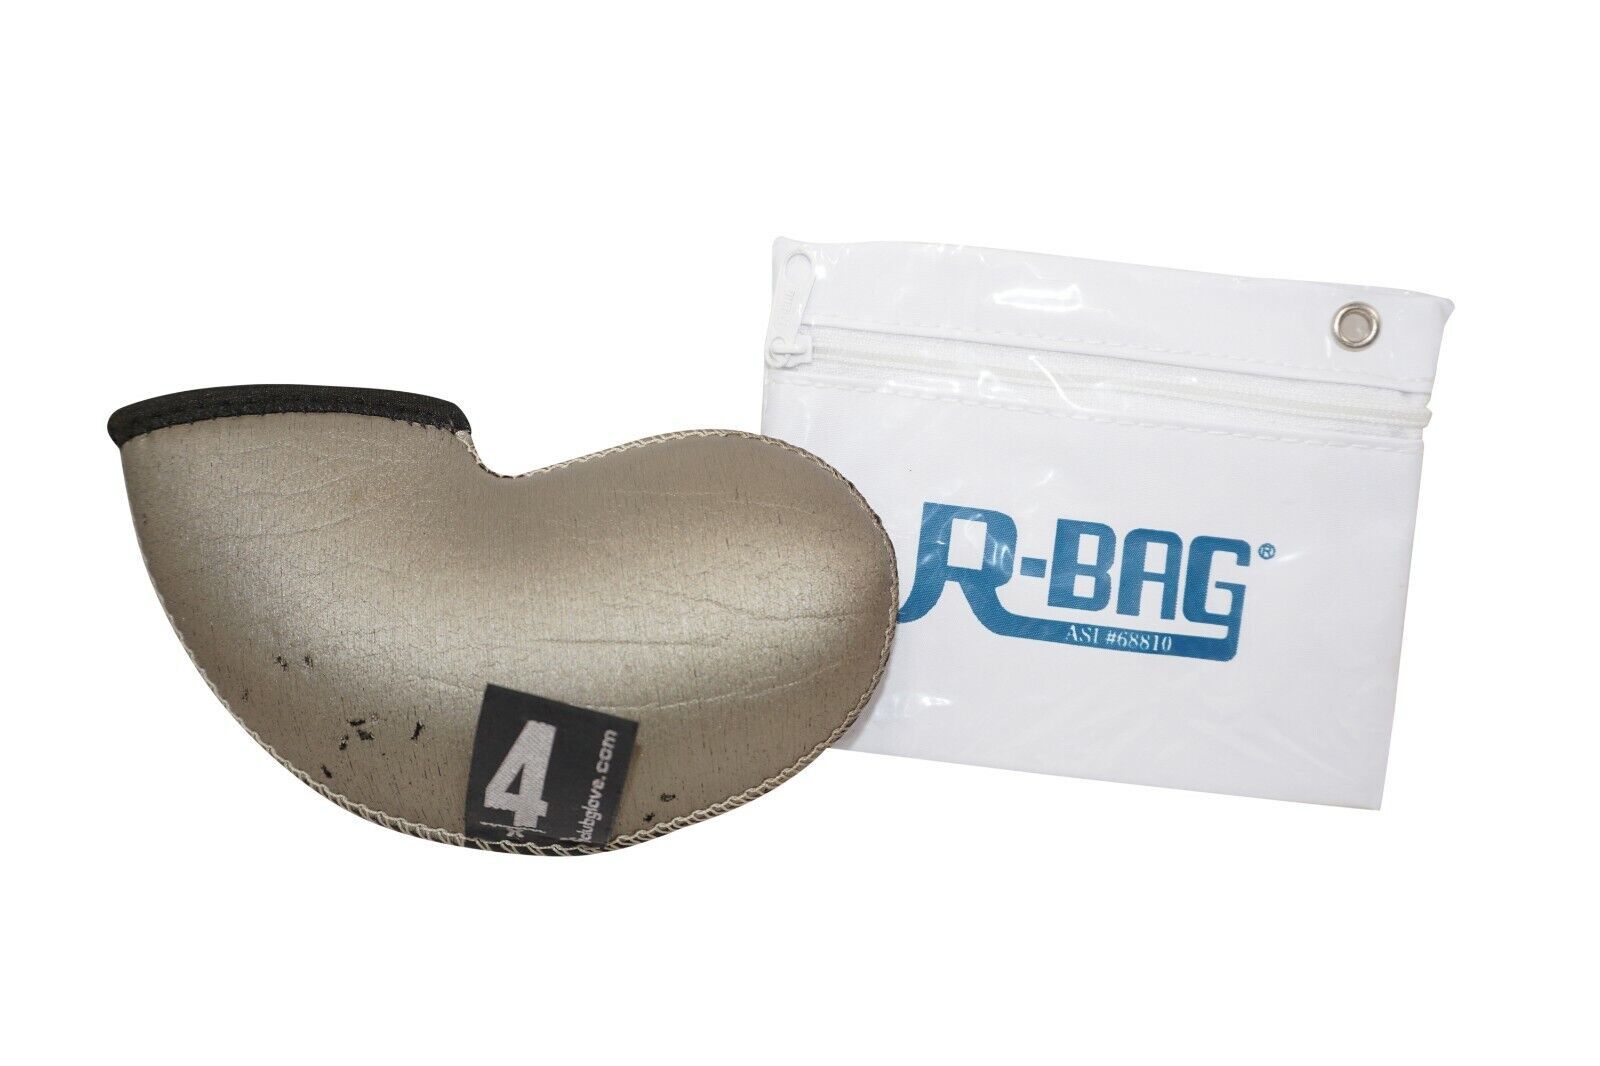 Primary image for Club Glove Gloveskin Brushed Metallic #4 - Golf Head Cover & R-bag Accessory